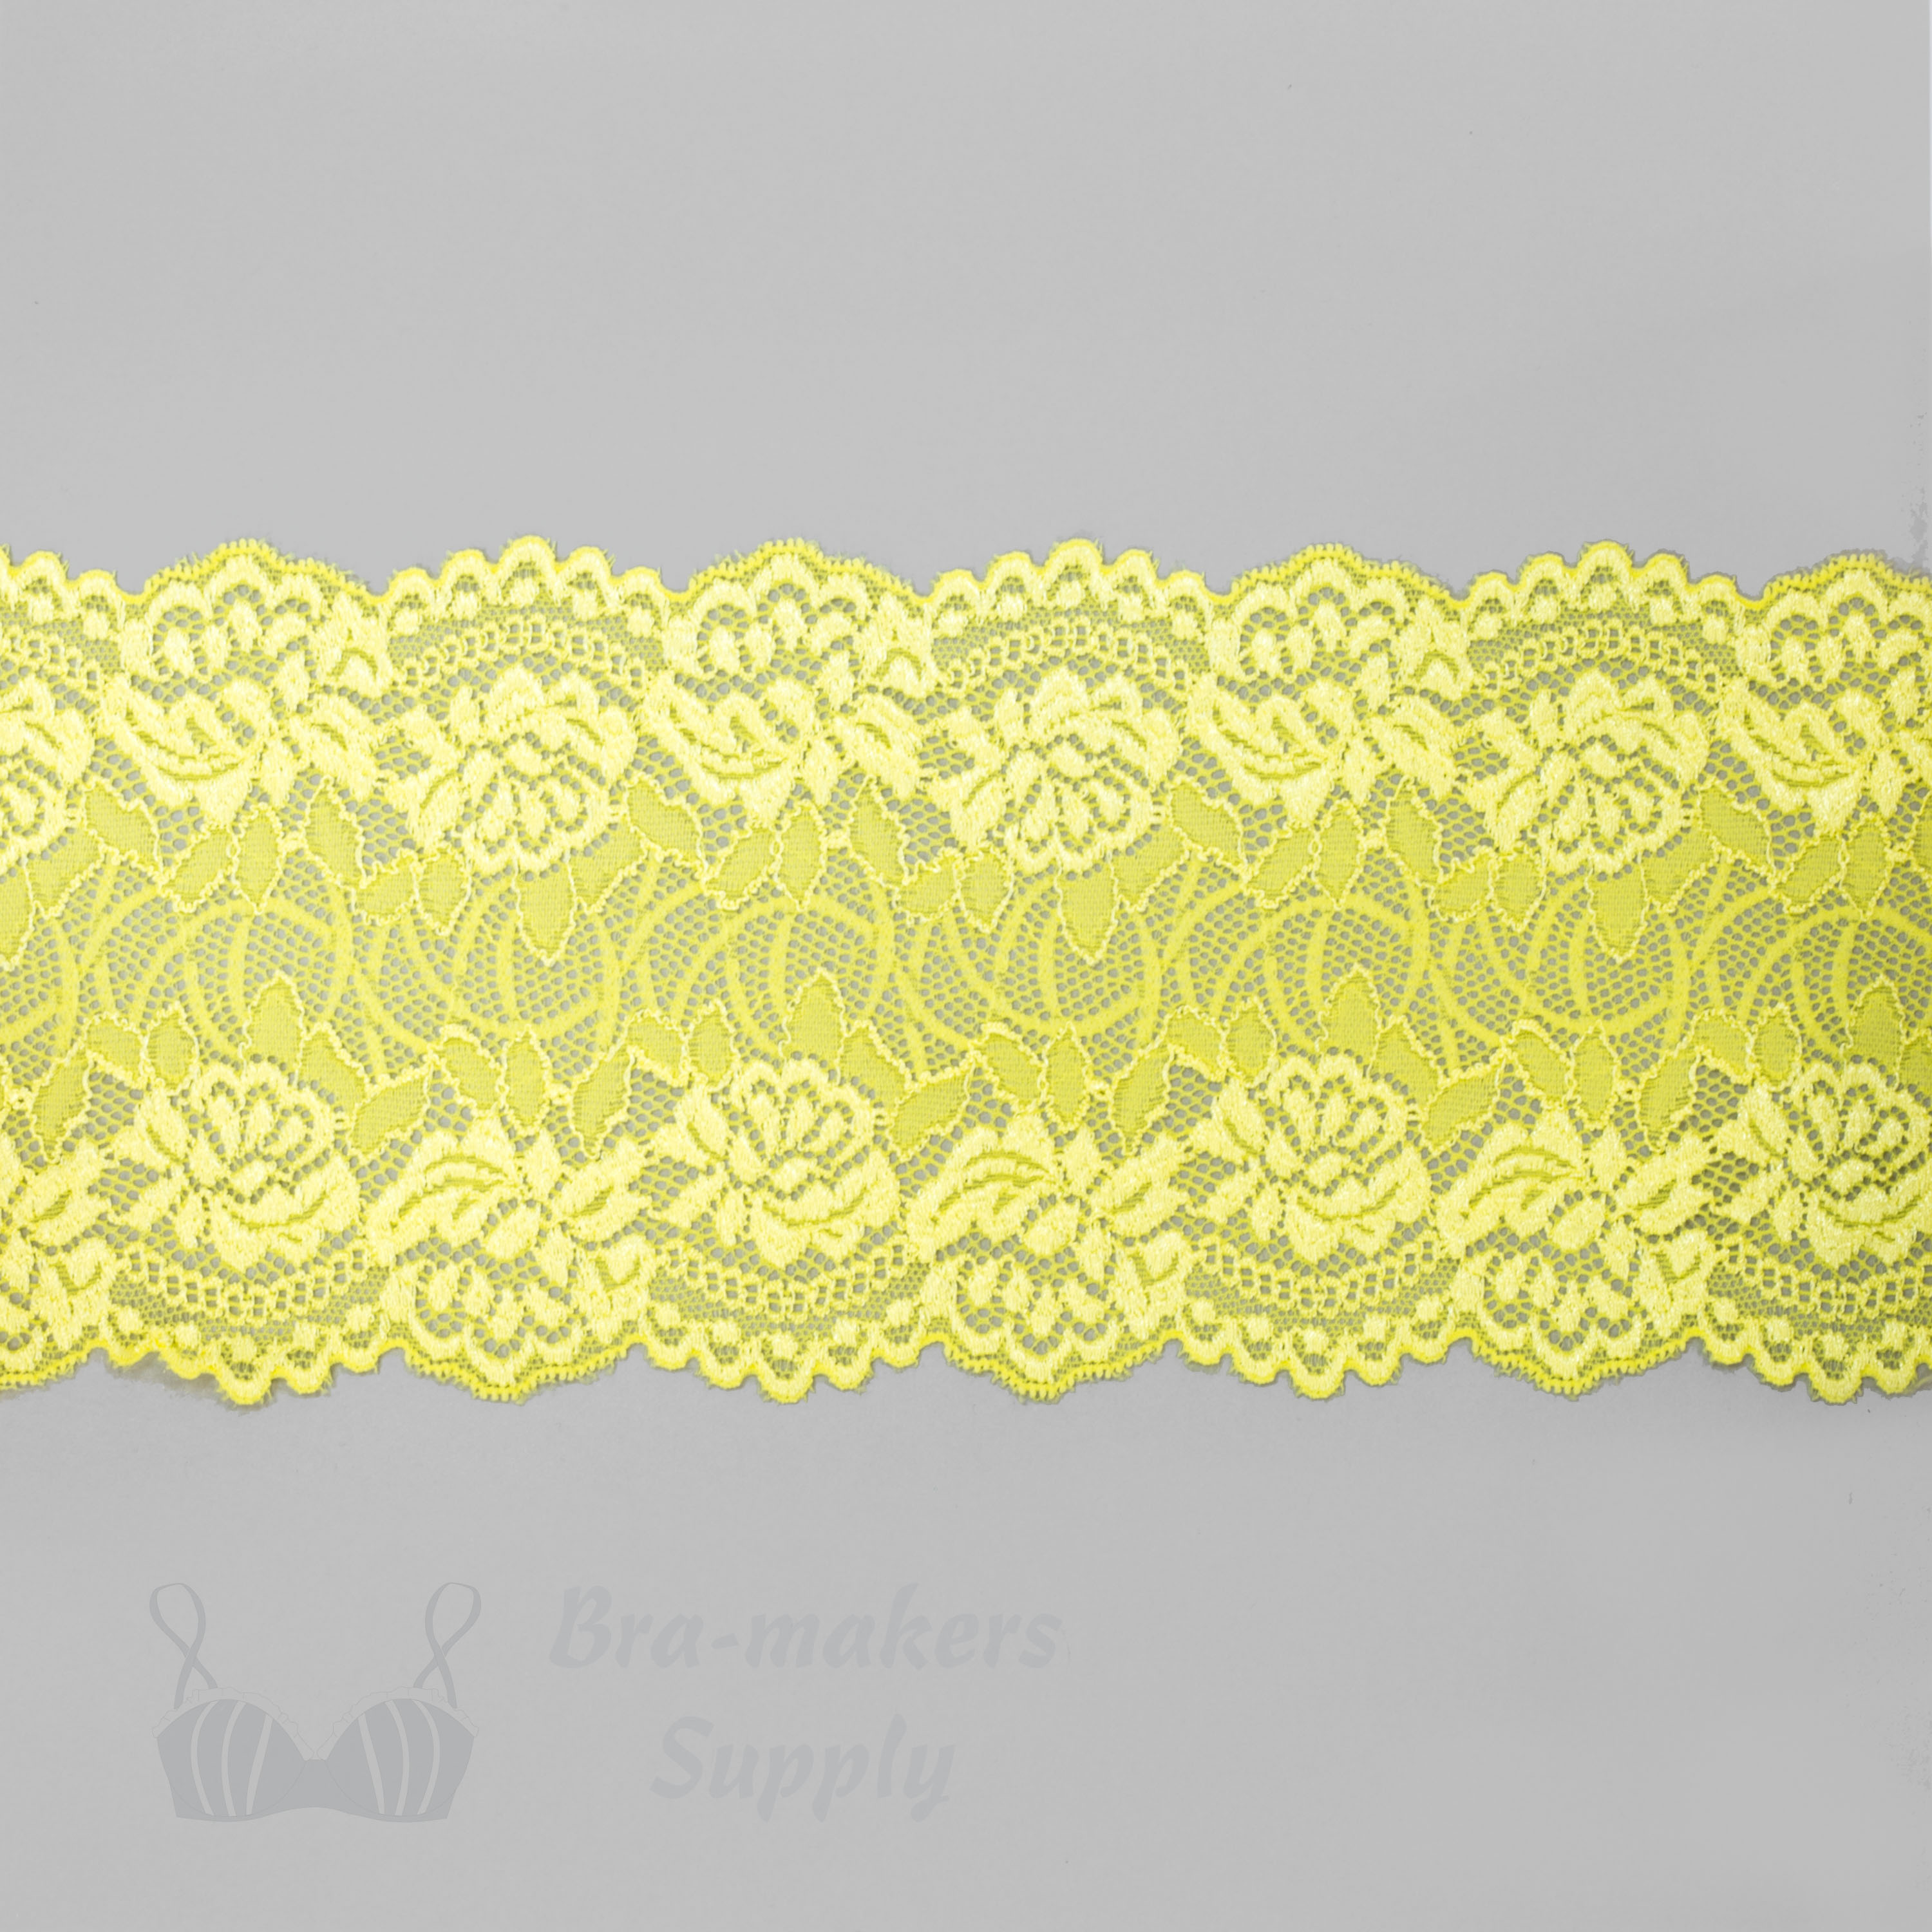 https://www.braandcorsetsupplies.com/wp-content/uploads/2016/08/stretch-laces-5-inch-13-cm-five-inch-bright-yellow-floral-stretch-lace-LS-50-23-from-Bra-Makers-Supply.jpg